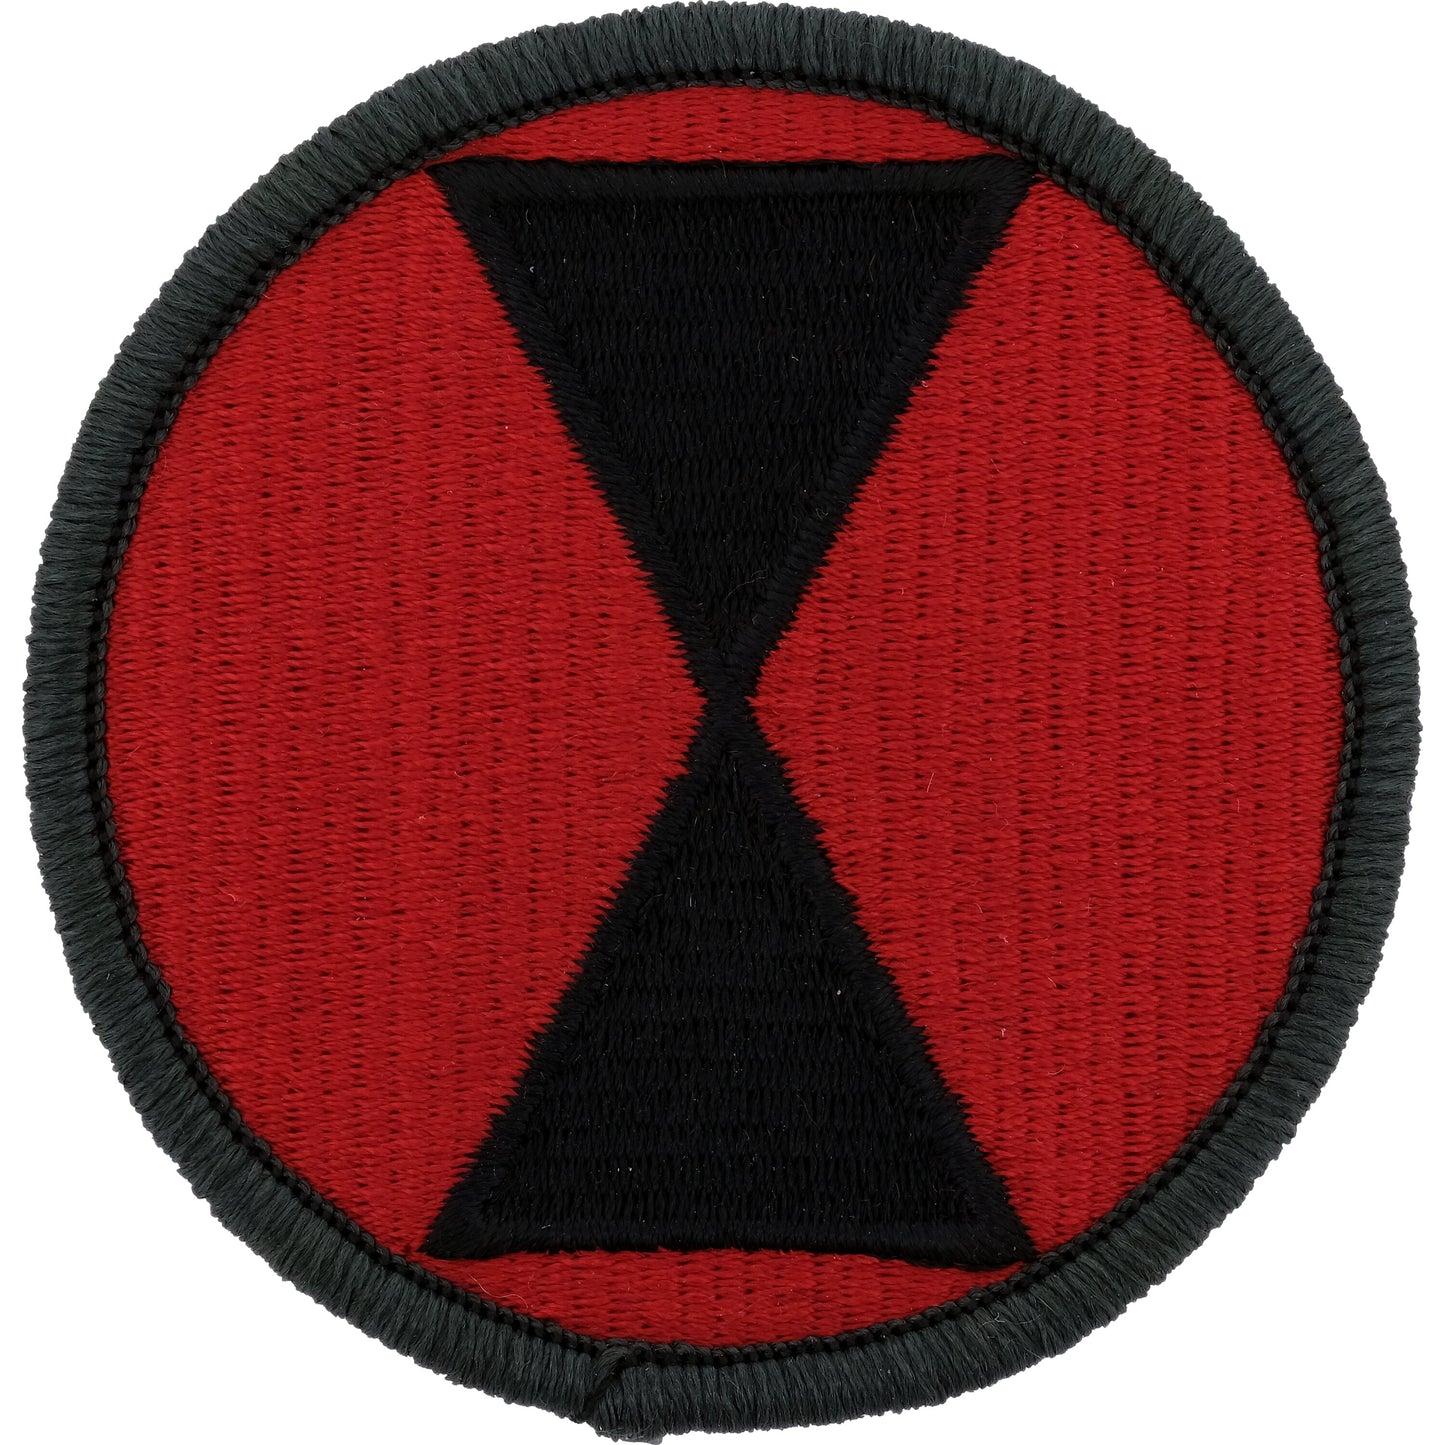 U.S Army 7th Infantry Division Class A Patch 2"